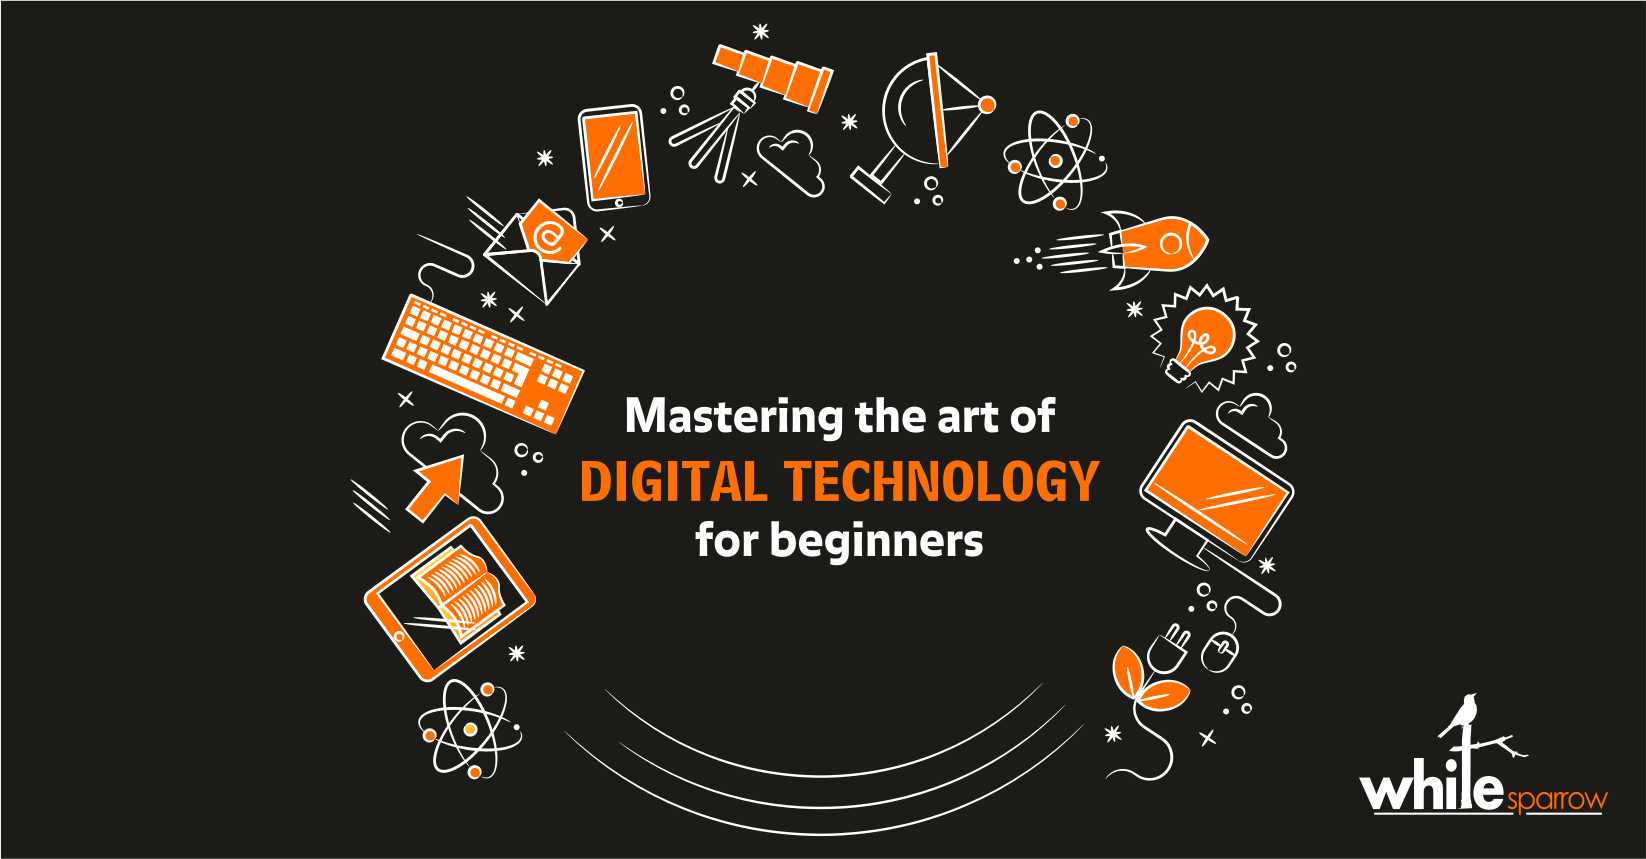 Mastering the art of digital technology so that your business doesn’t get left behind.